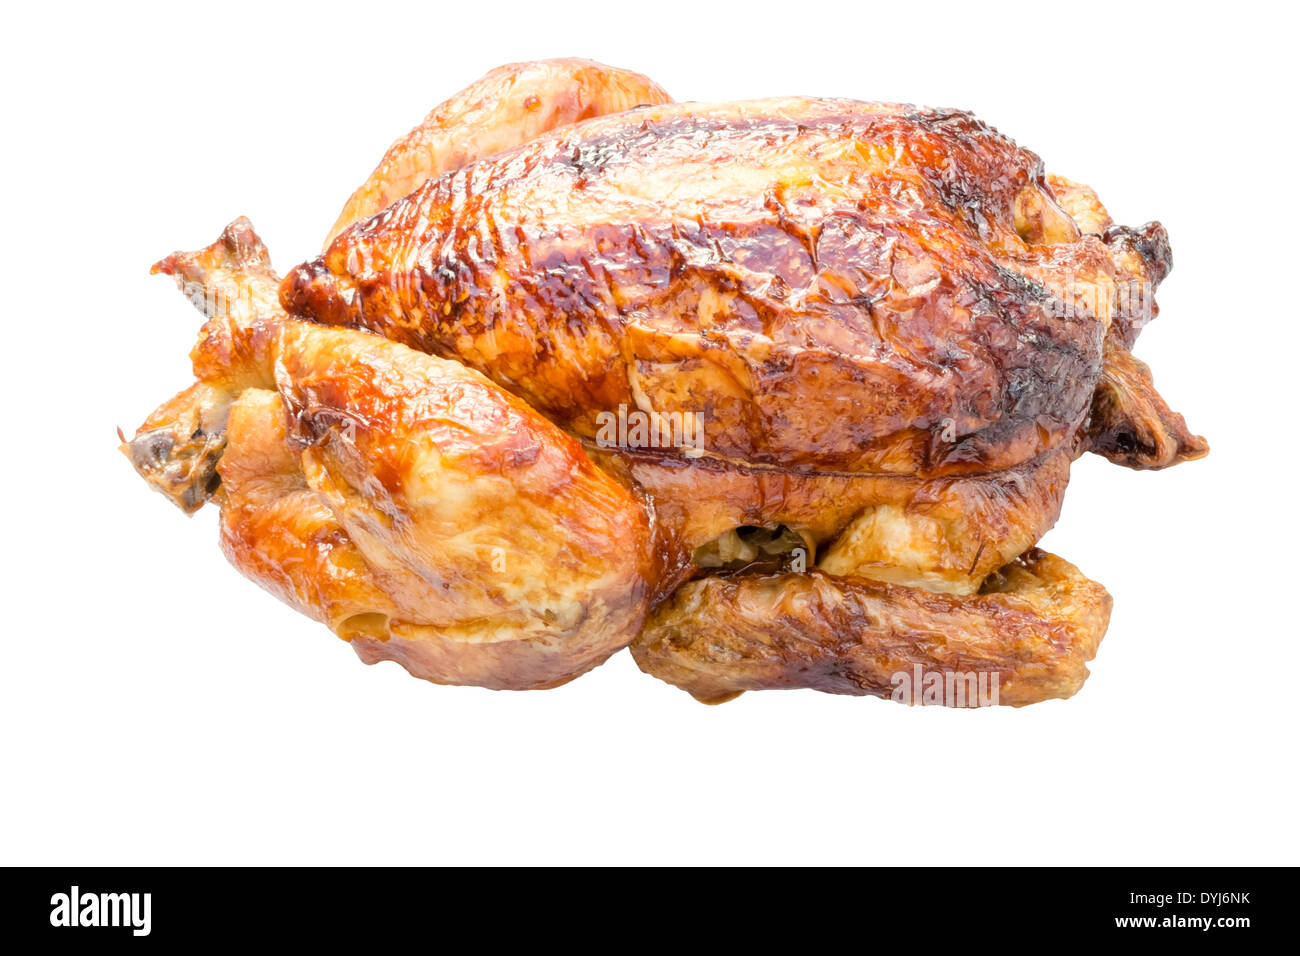 Whole Roast Chicken ready cooked from the supermarket, UK. Stock Photo